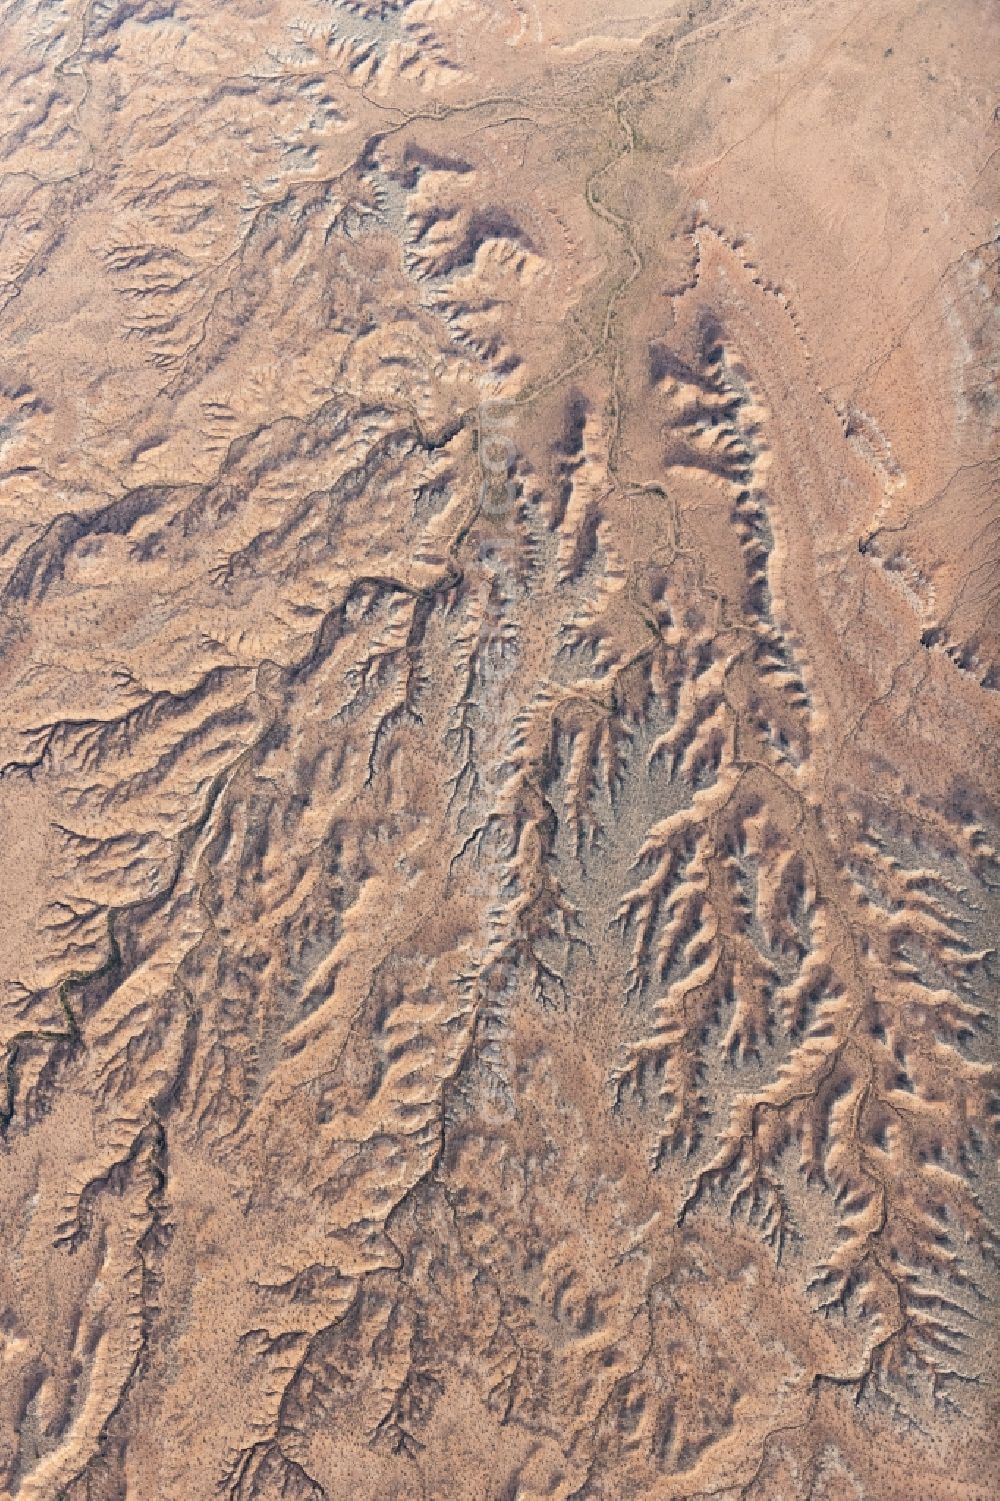 Aerial photograph Hackberry - Landscape of the dry desert deformed by soil erosion and traces of water in Hackberry in Arizona, United States of America